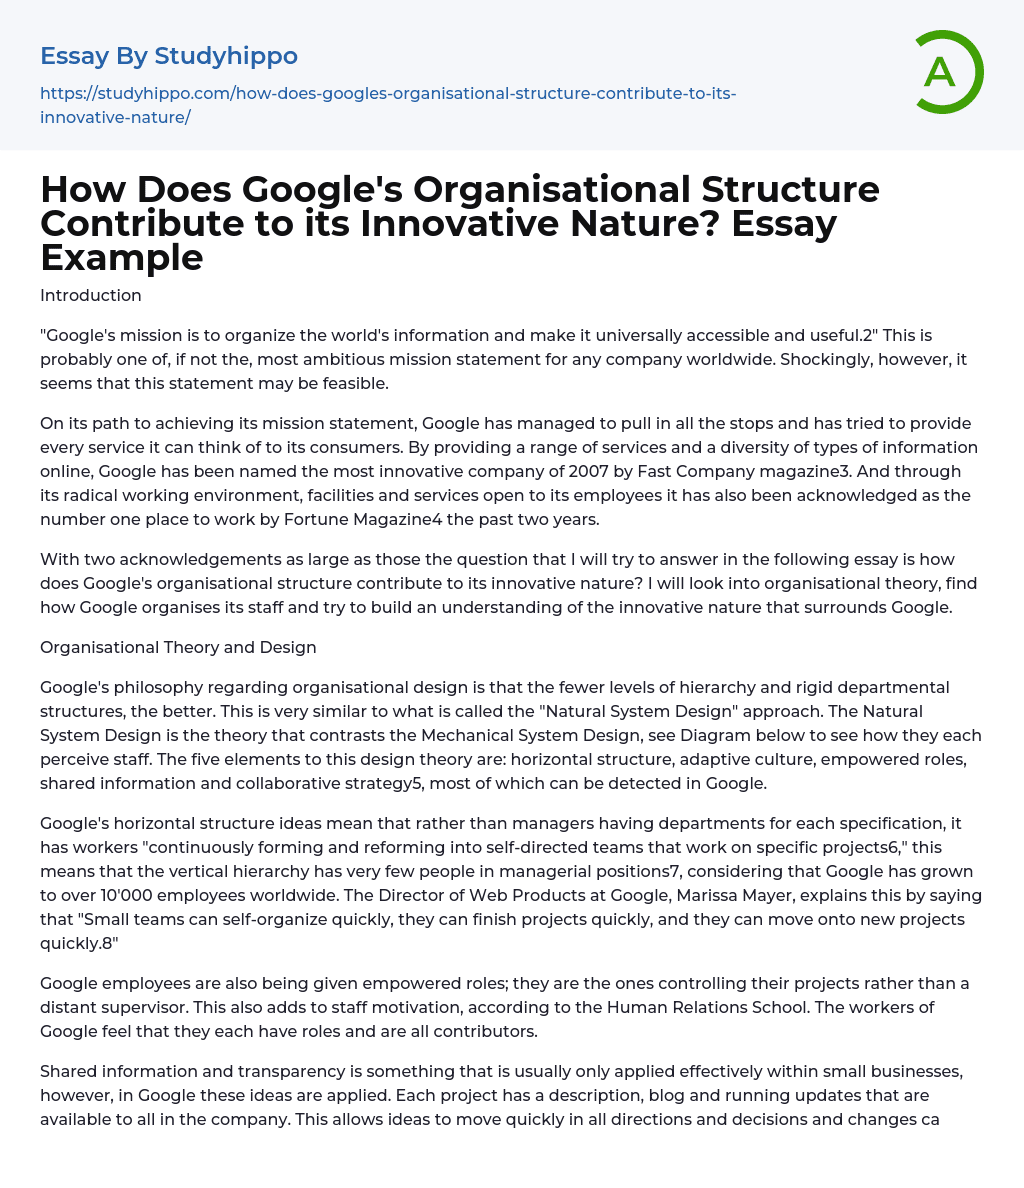 How Does Google’s Organisational Structure Contribute to its Innovative Nature? Essay Example